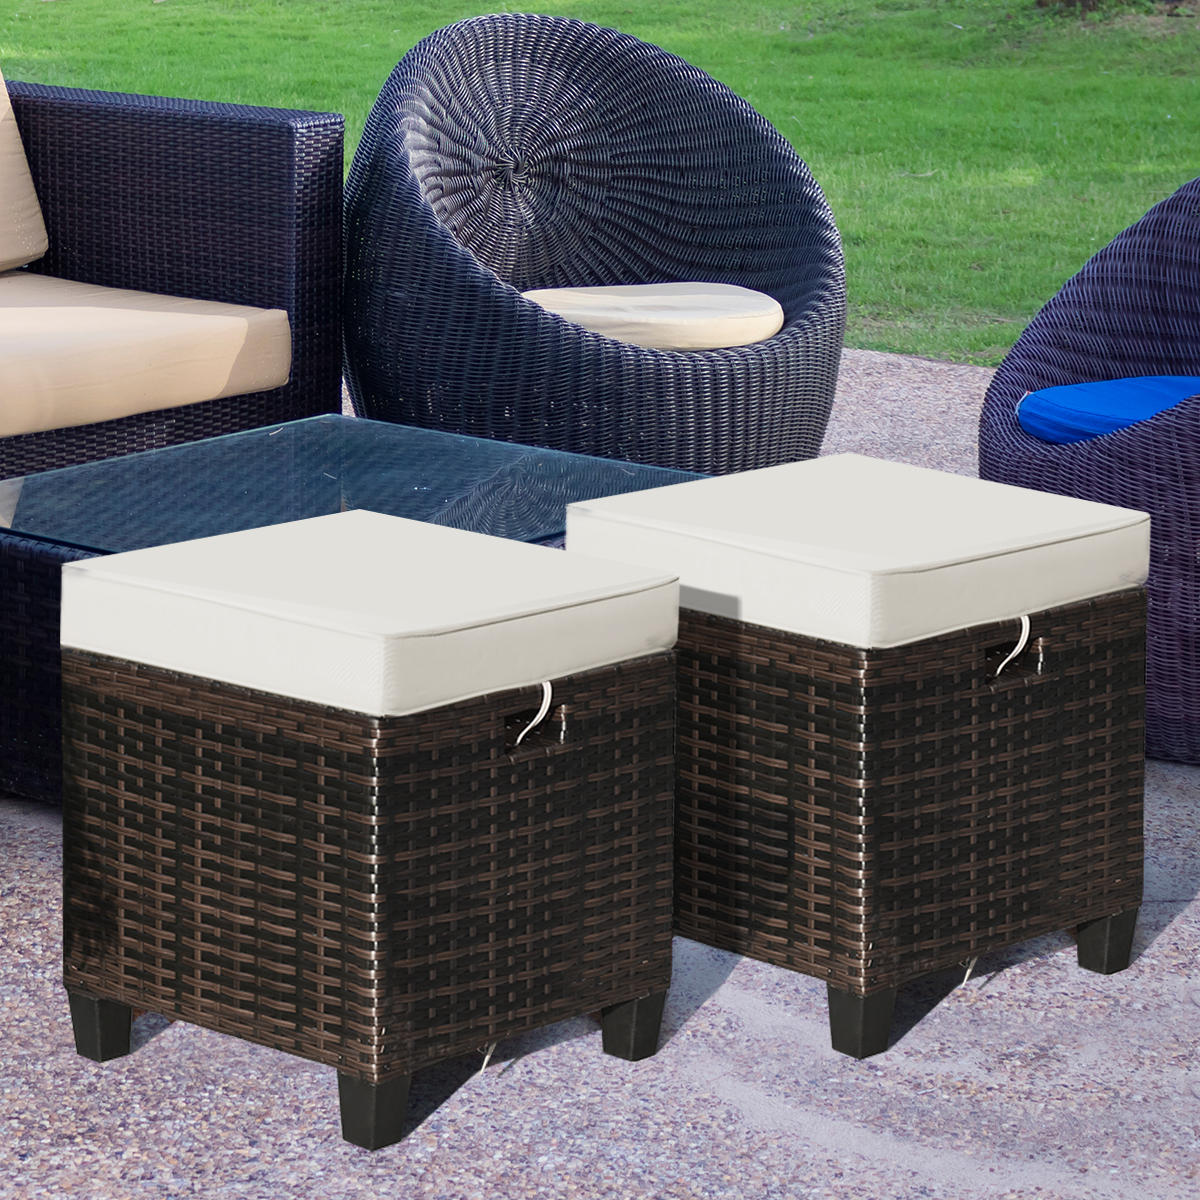 Costway 2PCS Patio Rattan Ottoman Cushioned Seat Foot Rest Coffee Table - image 1 of 10